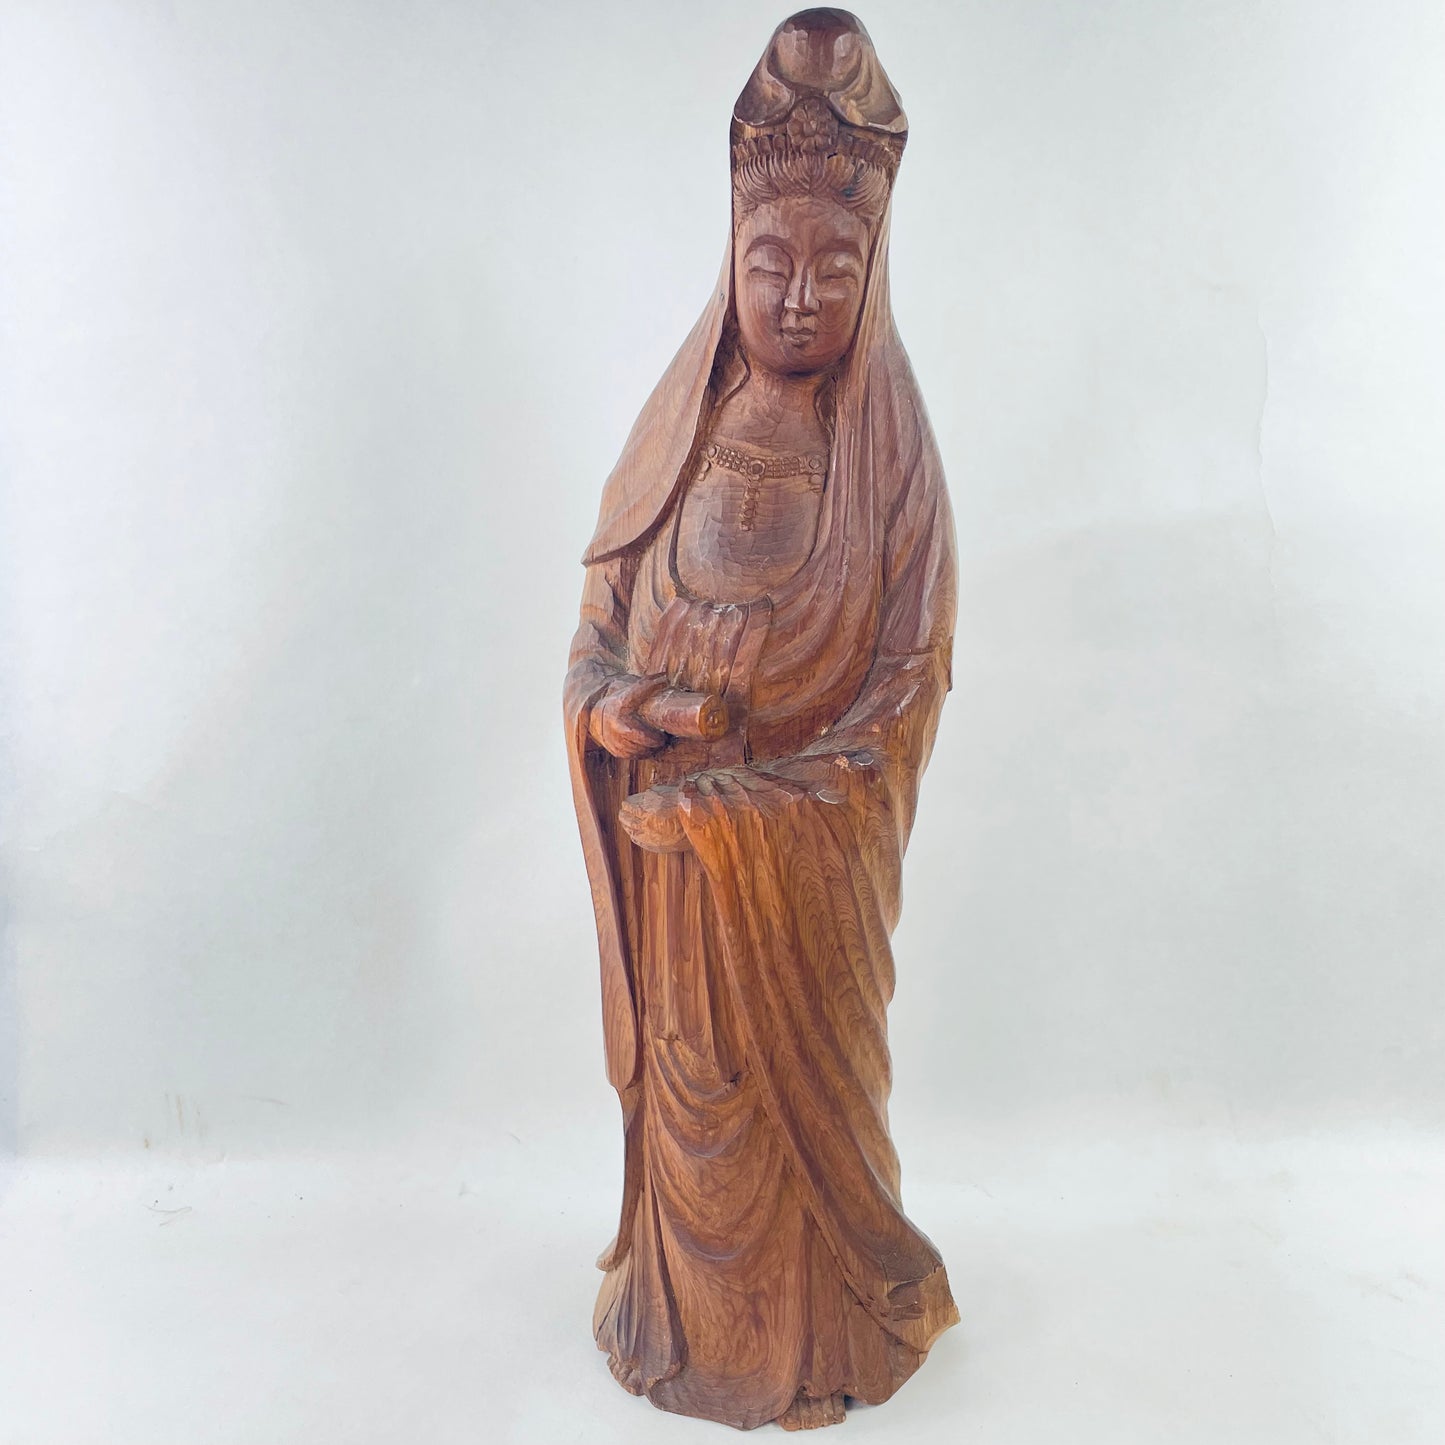 Antique Statue of Quan-Yin Japanese Wood Carved Avalokitishvara Kanon Bodisattva of Compassion Standing Pose 11.5” Tall